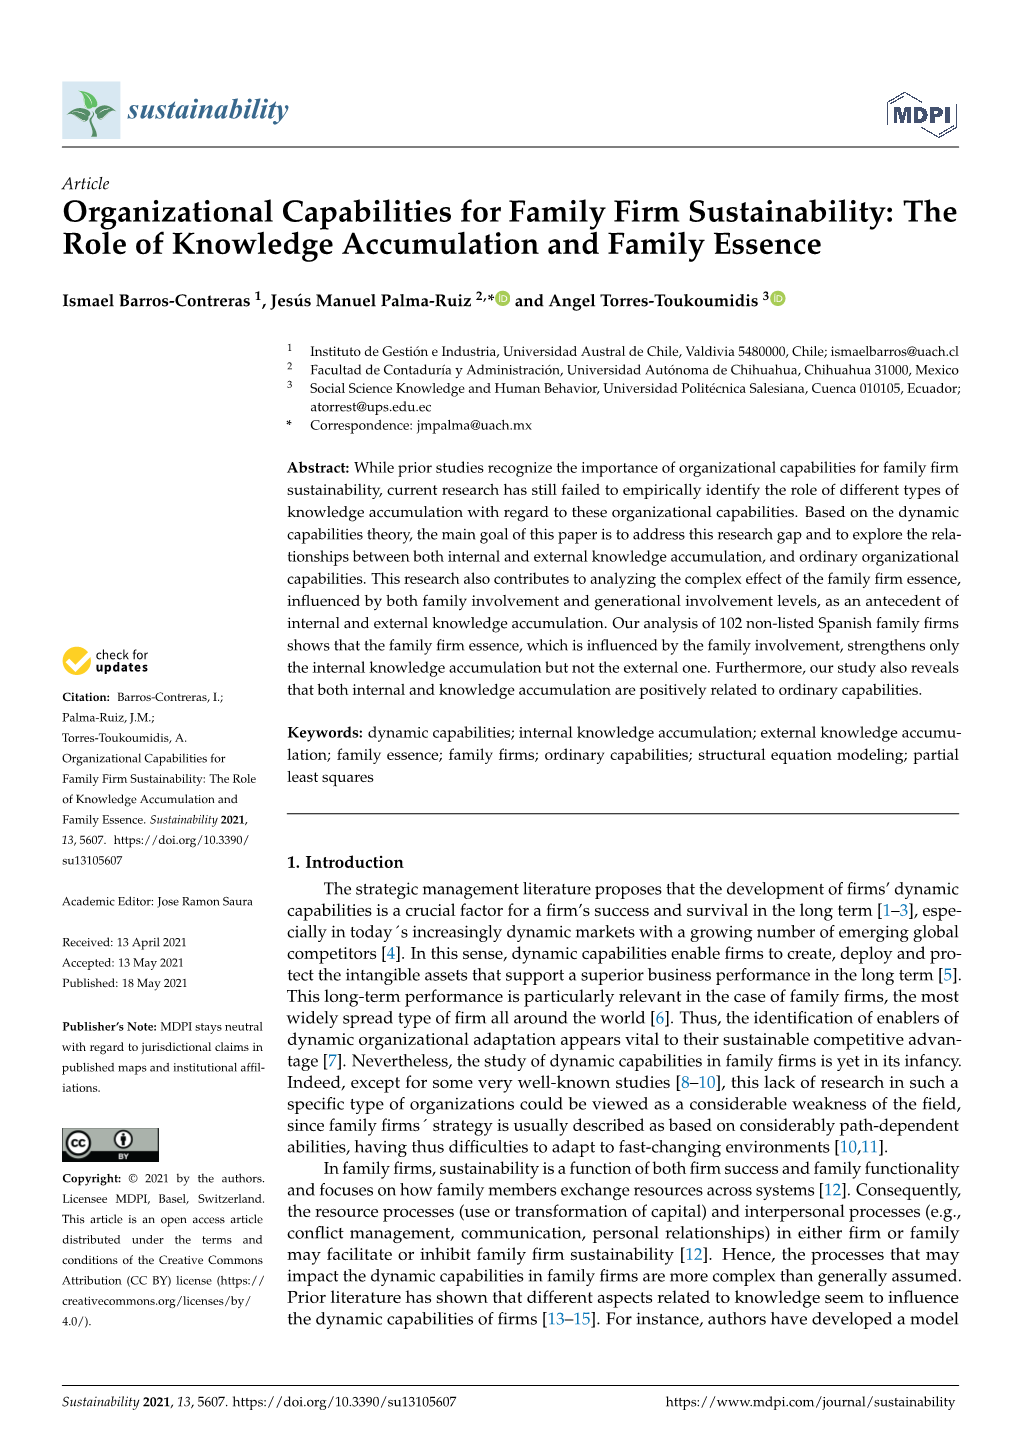 Organizational Capabilities for Family Firm Sustainability: the Role of Knowledge Accumulation and Family Essence